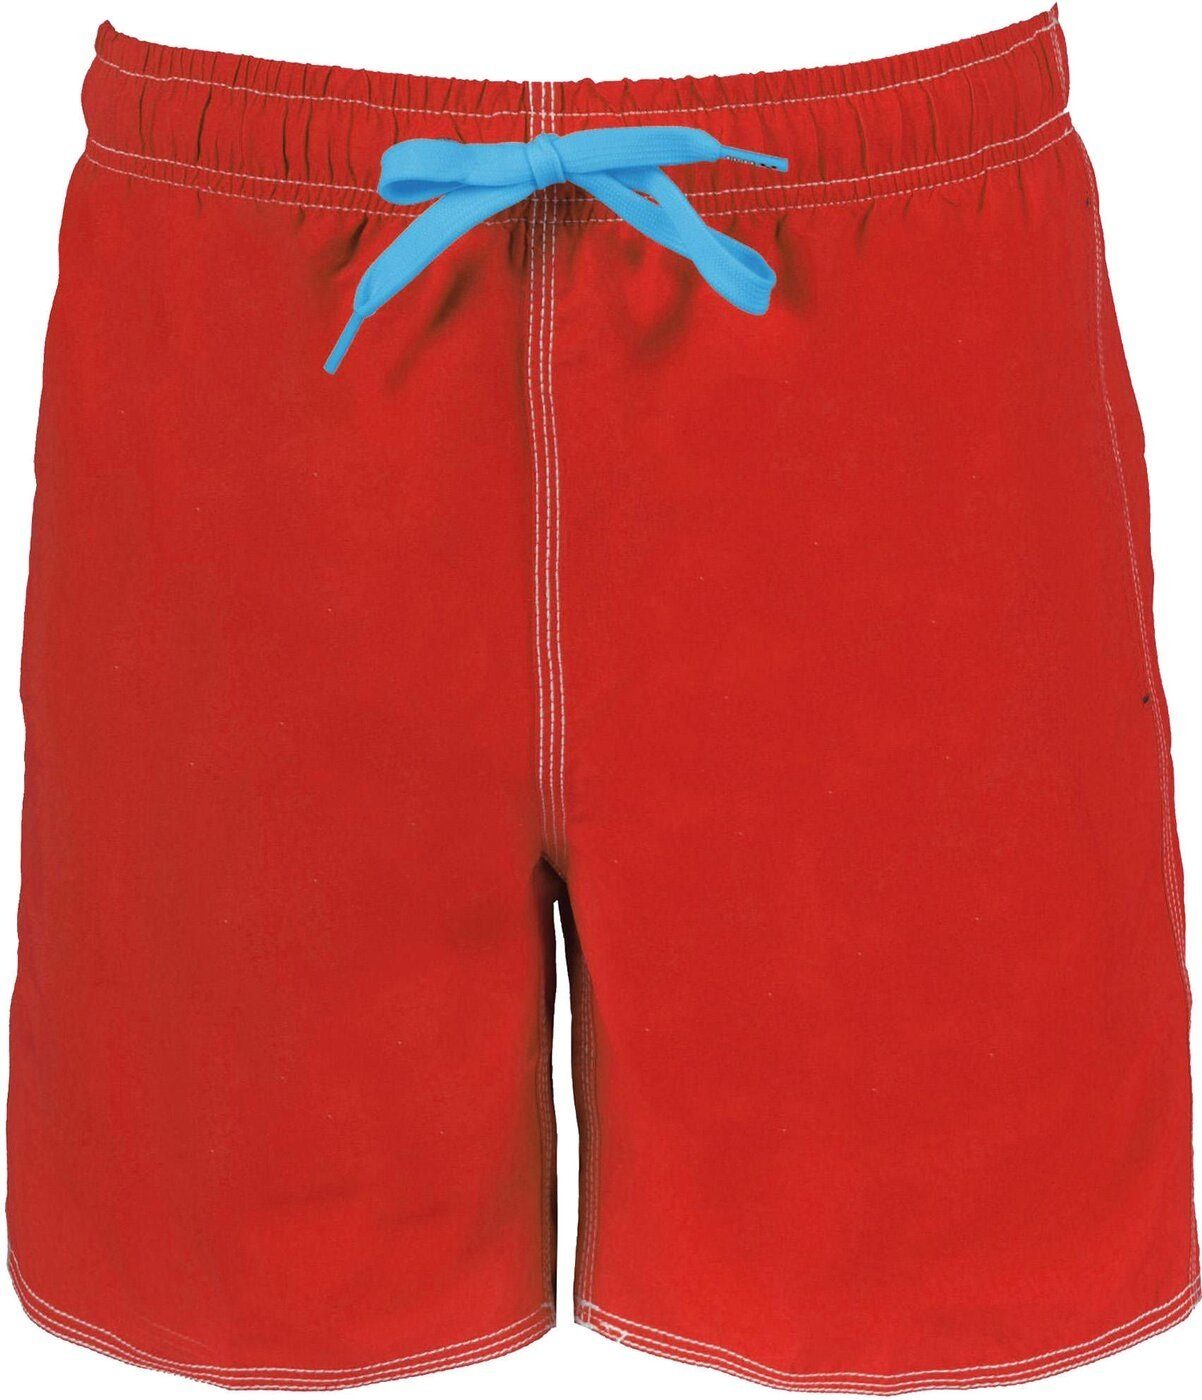 SOLID 48 RED-TURQUOISE FUNDAMENTALS Arena Badeshorts BOXER